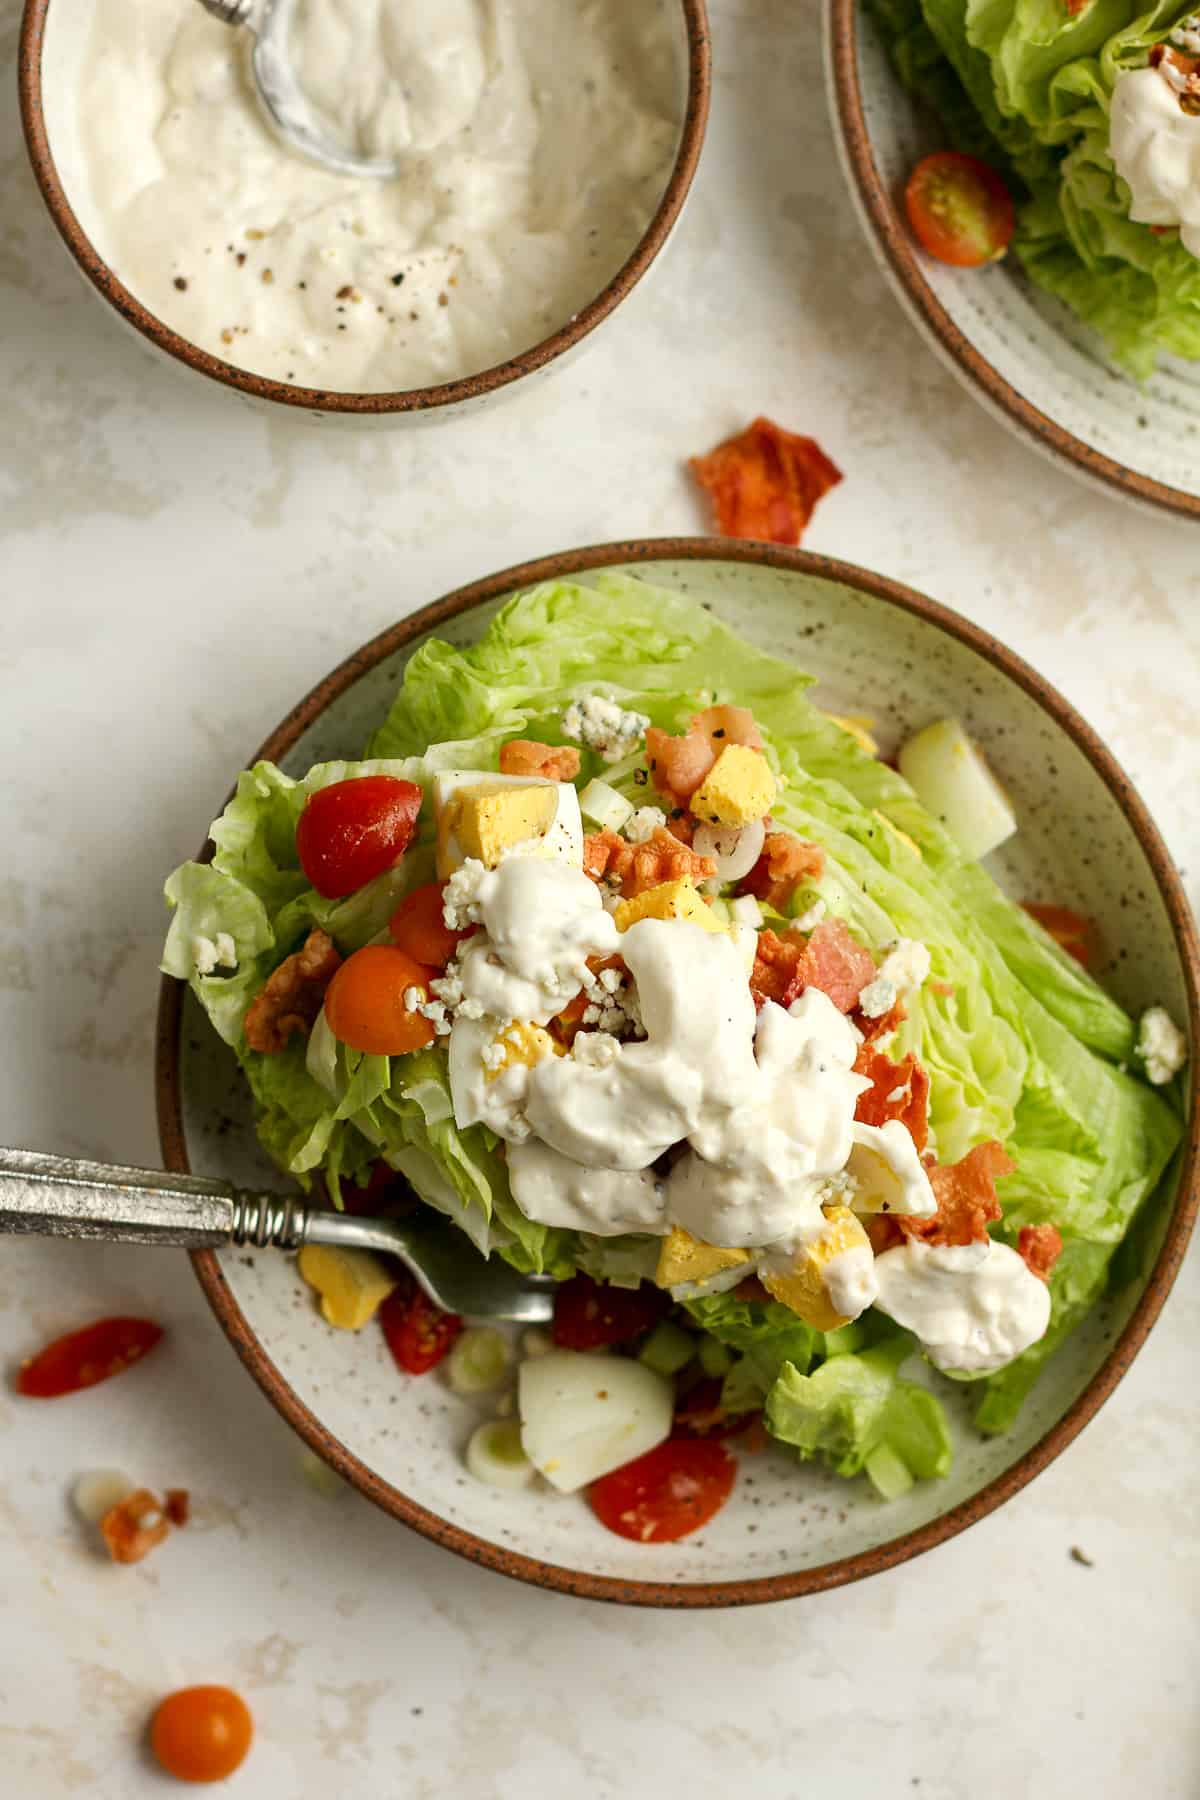 A wedge salad with toppings and blue cheese dressing.